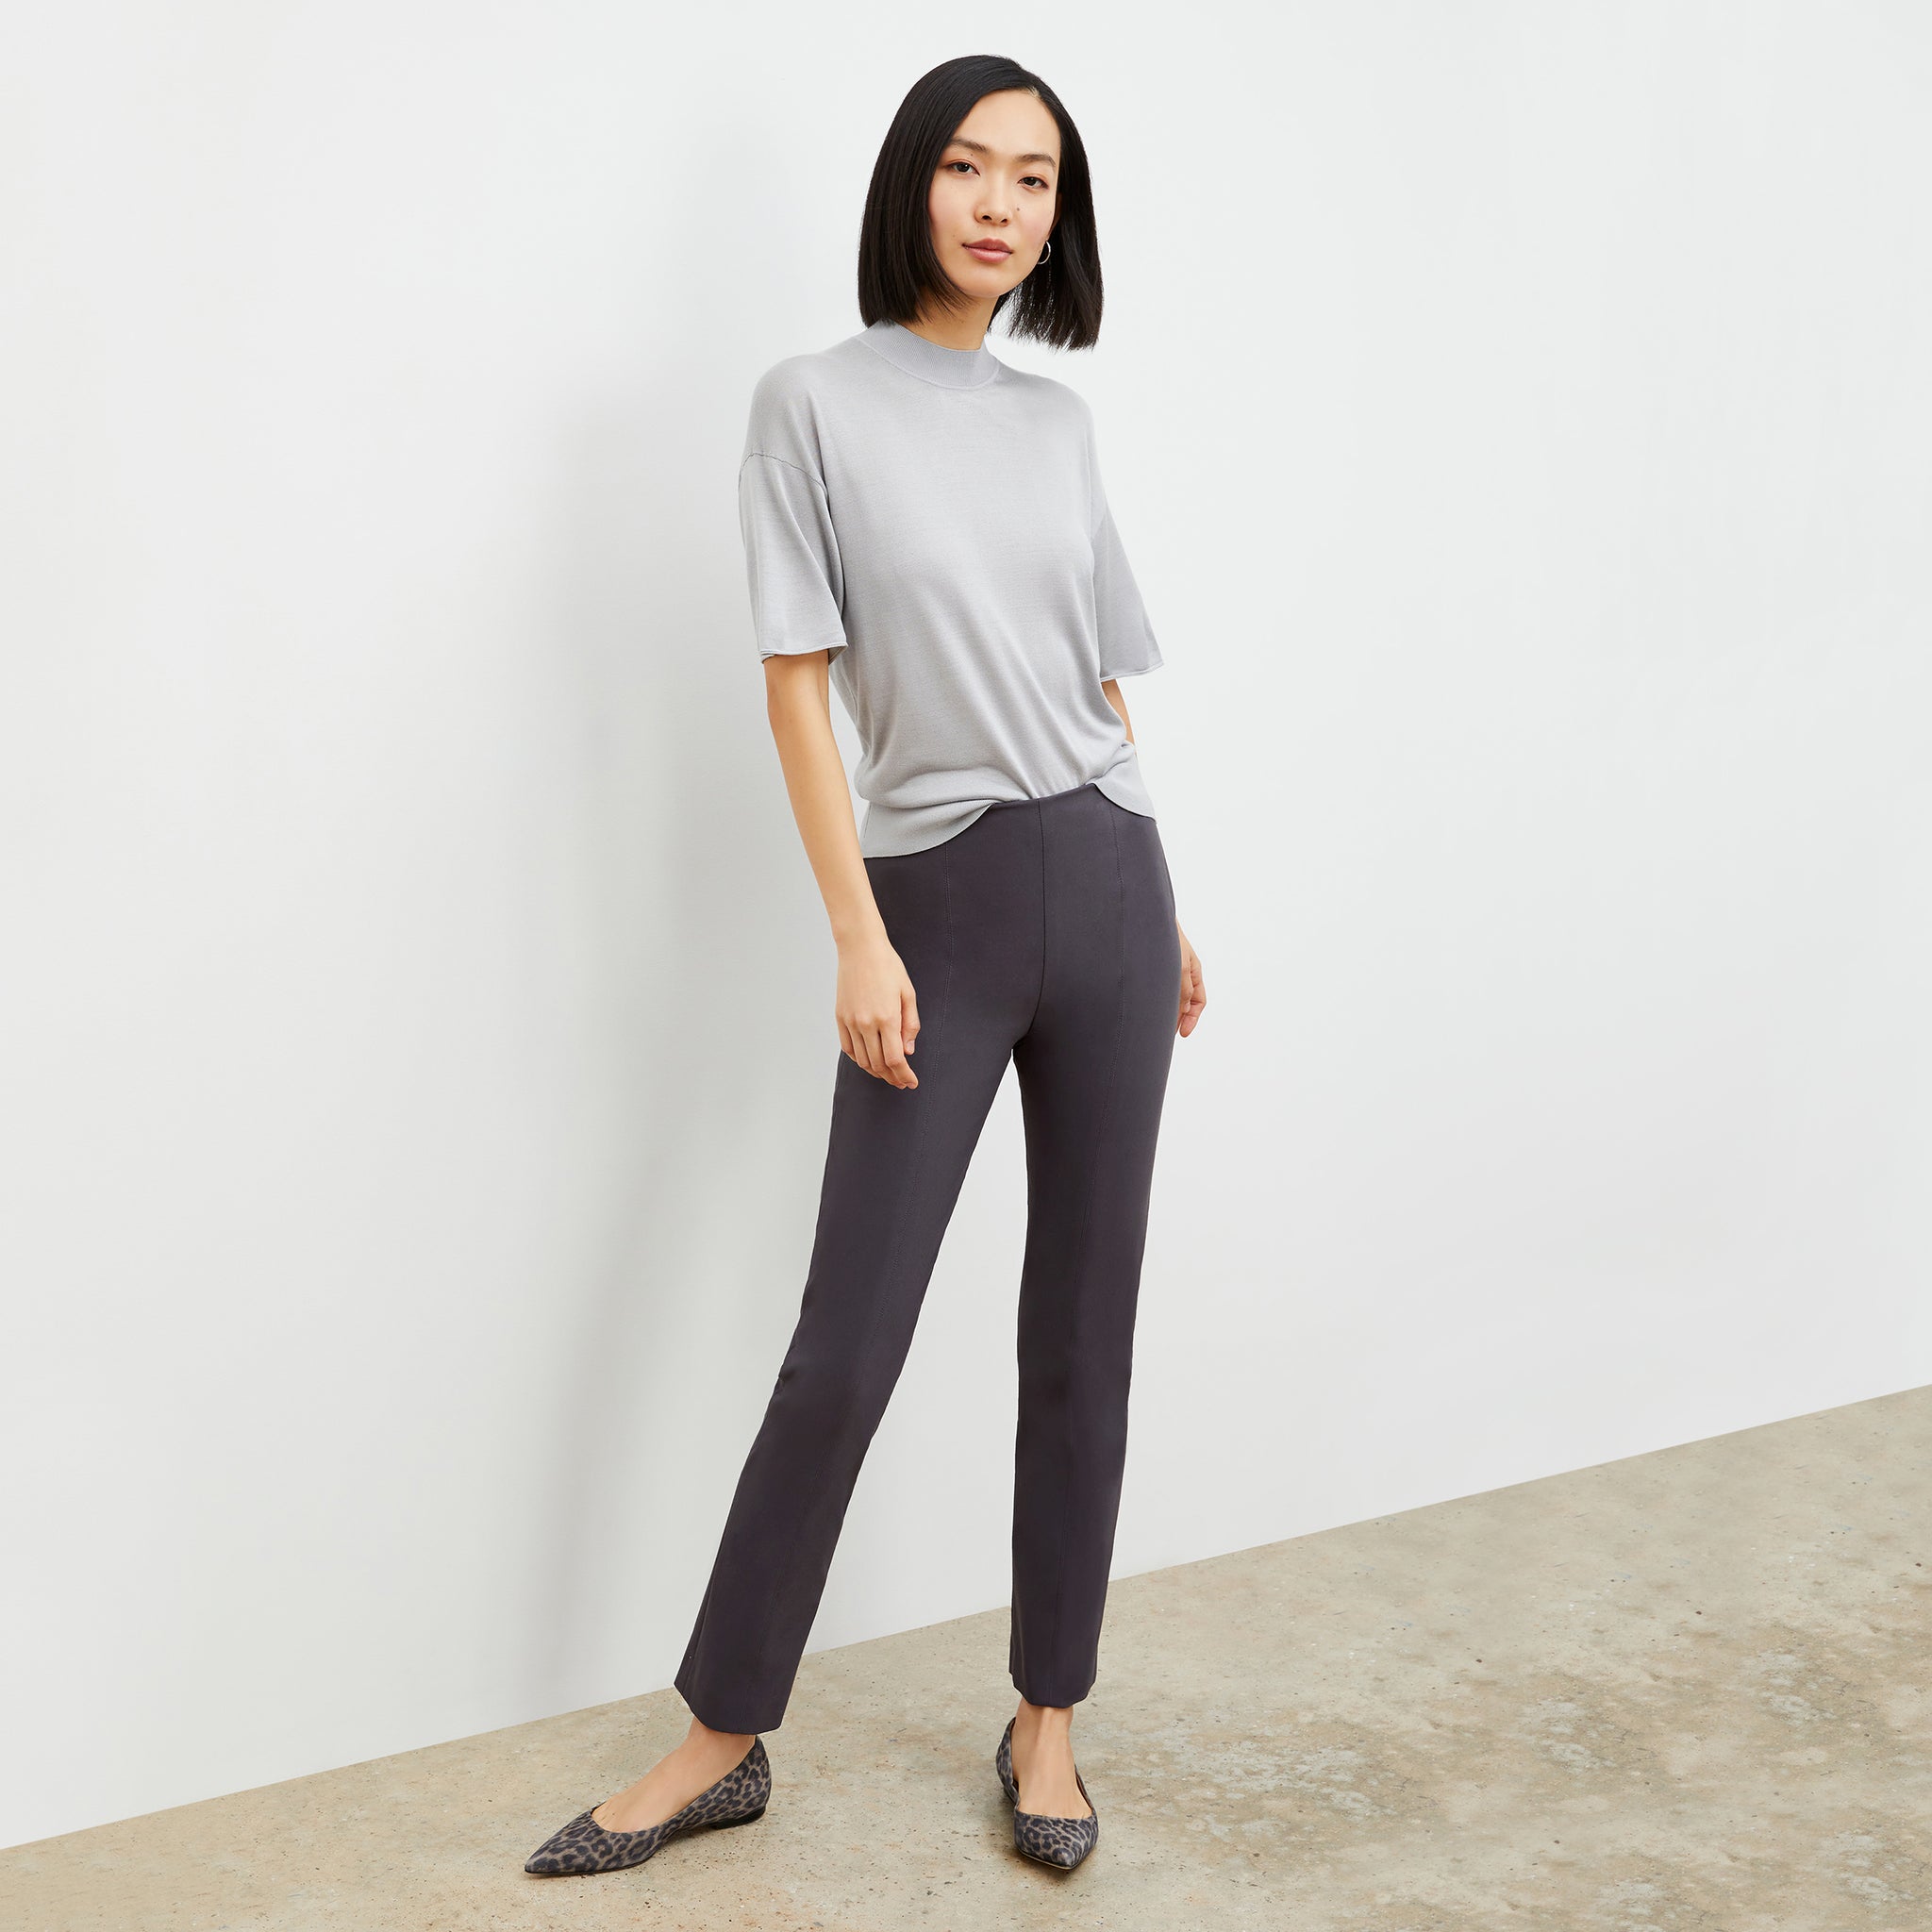 Everlane The Side-Zip Stretch Cotton Pants Navy Blue Women’s Size 8